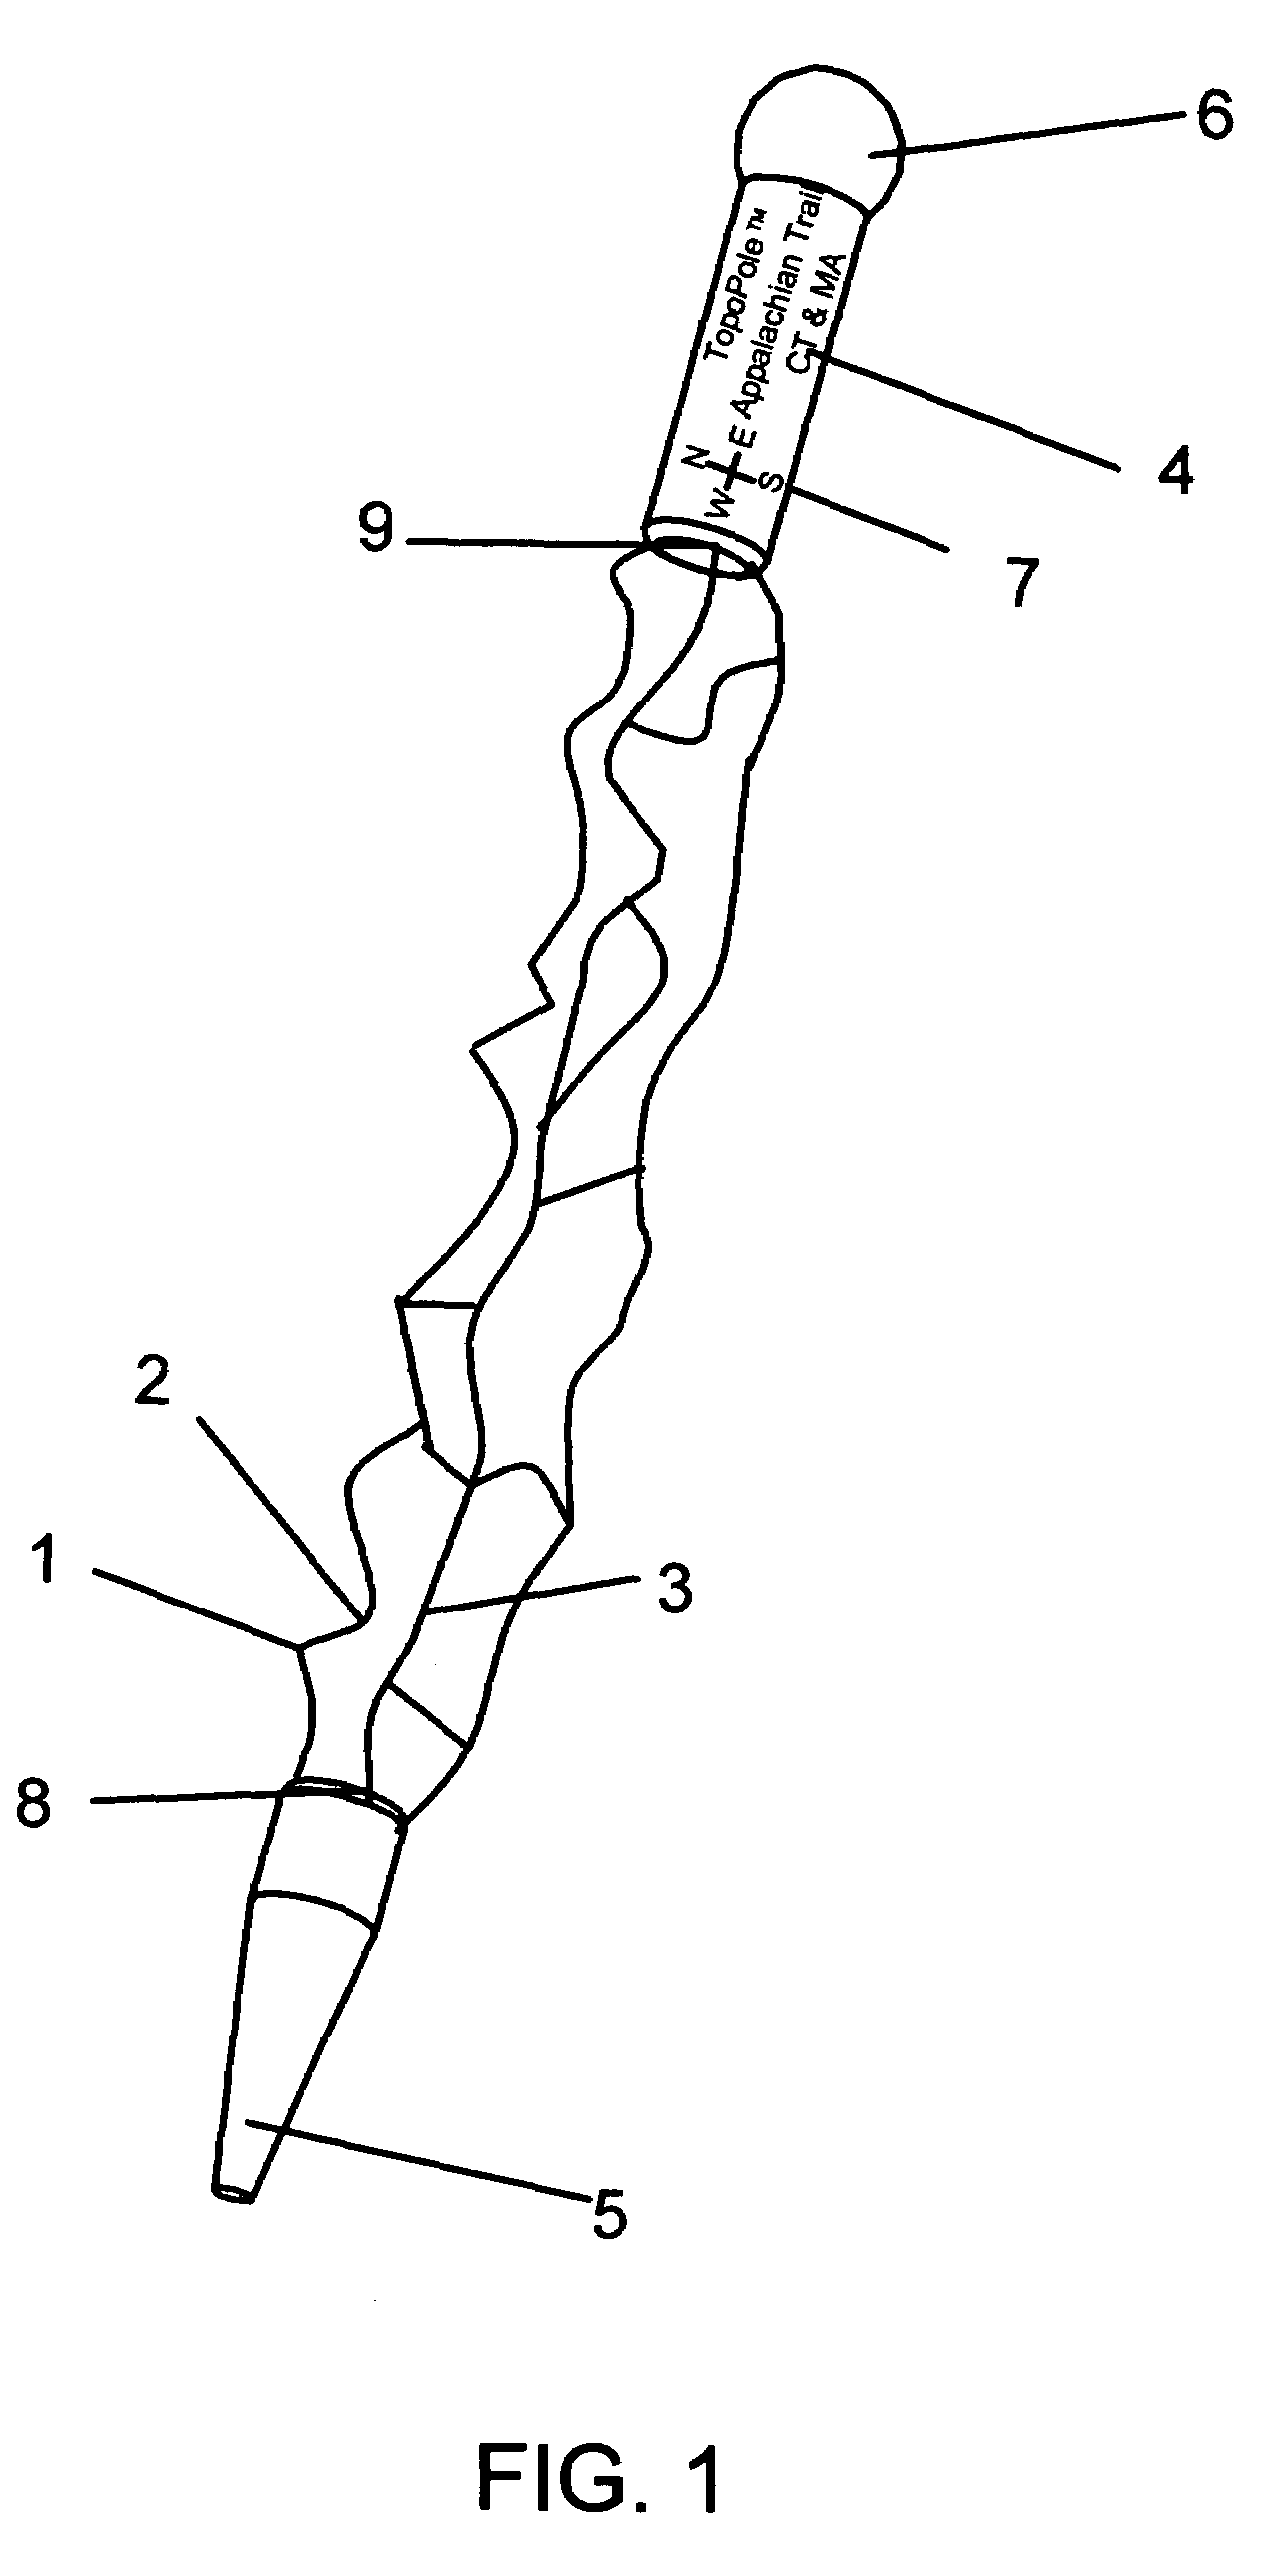 Hiking staff, ski pole, or boat paddle, with integrated topographical representations of trails and or terrain